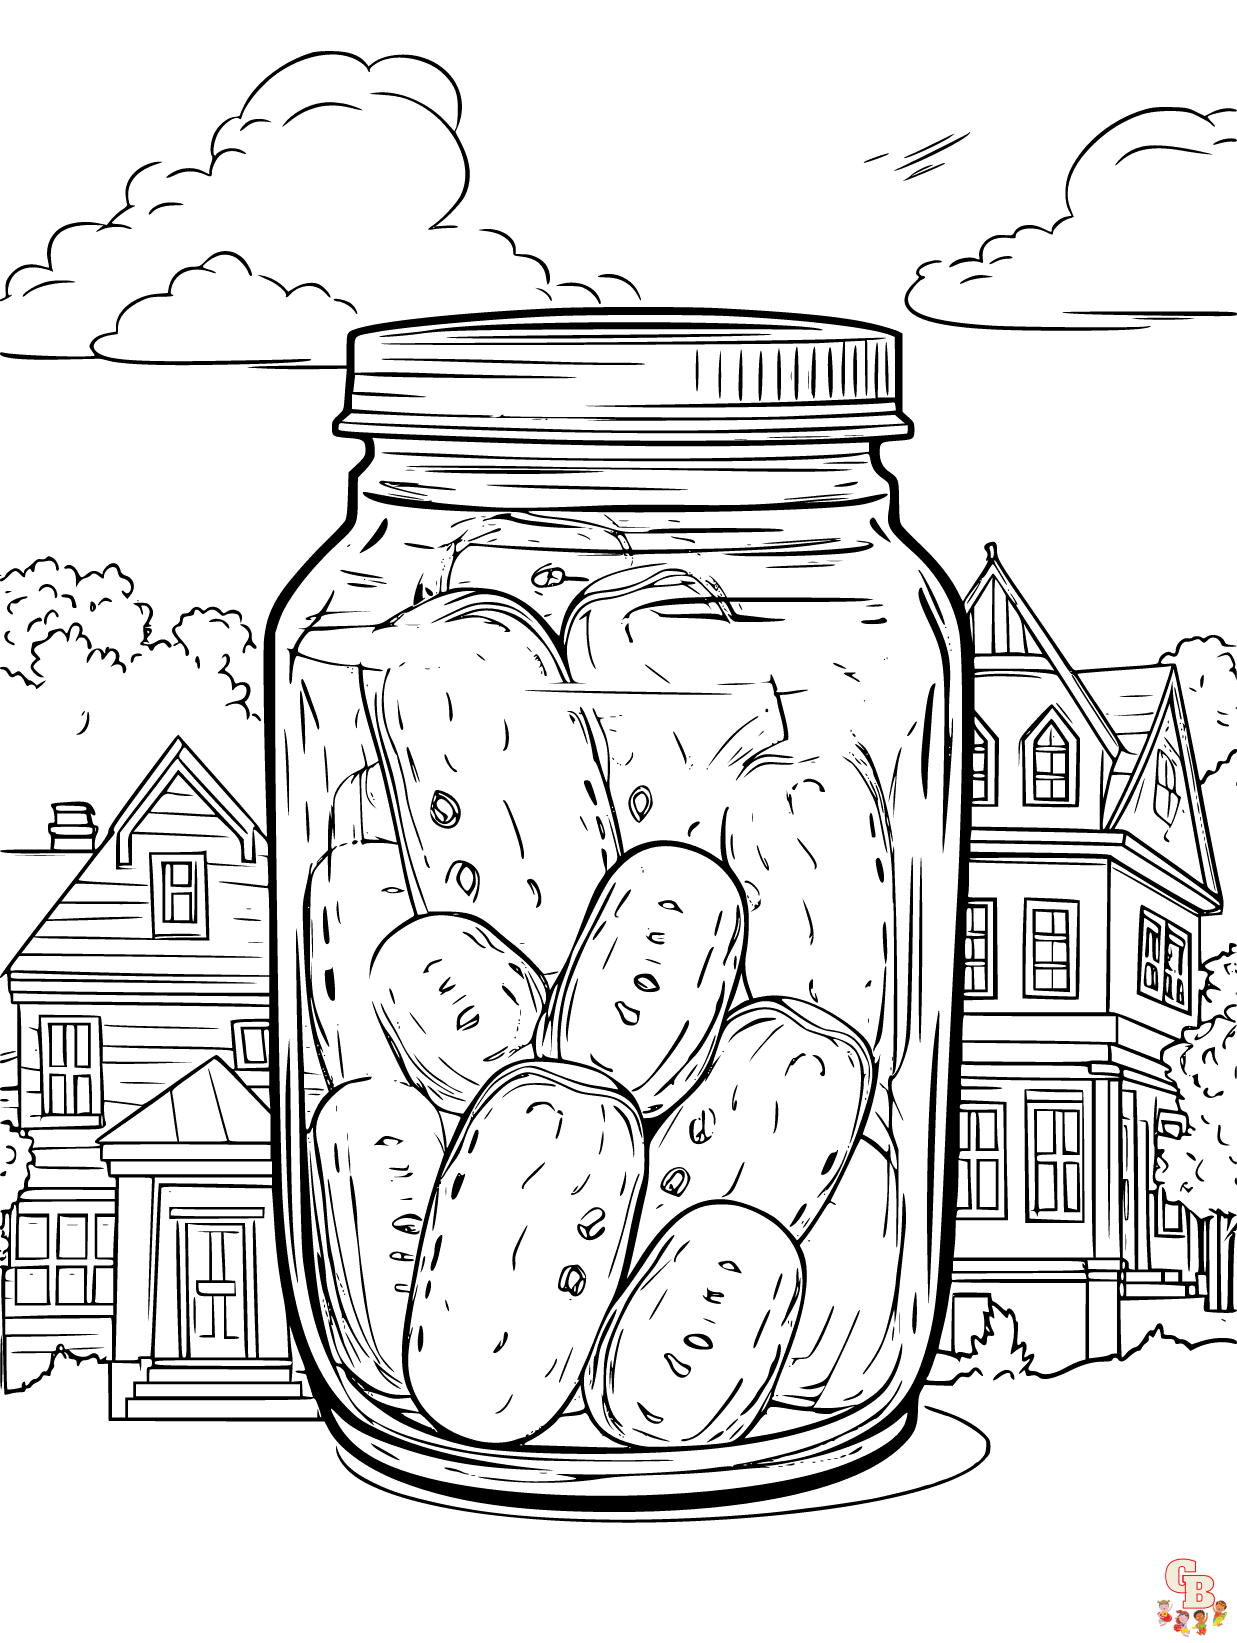 Pickle Coloring Pages